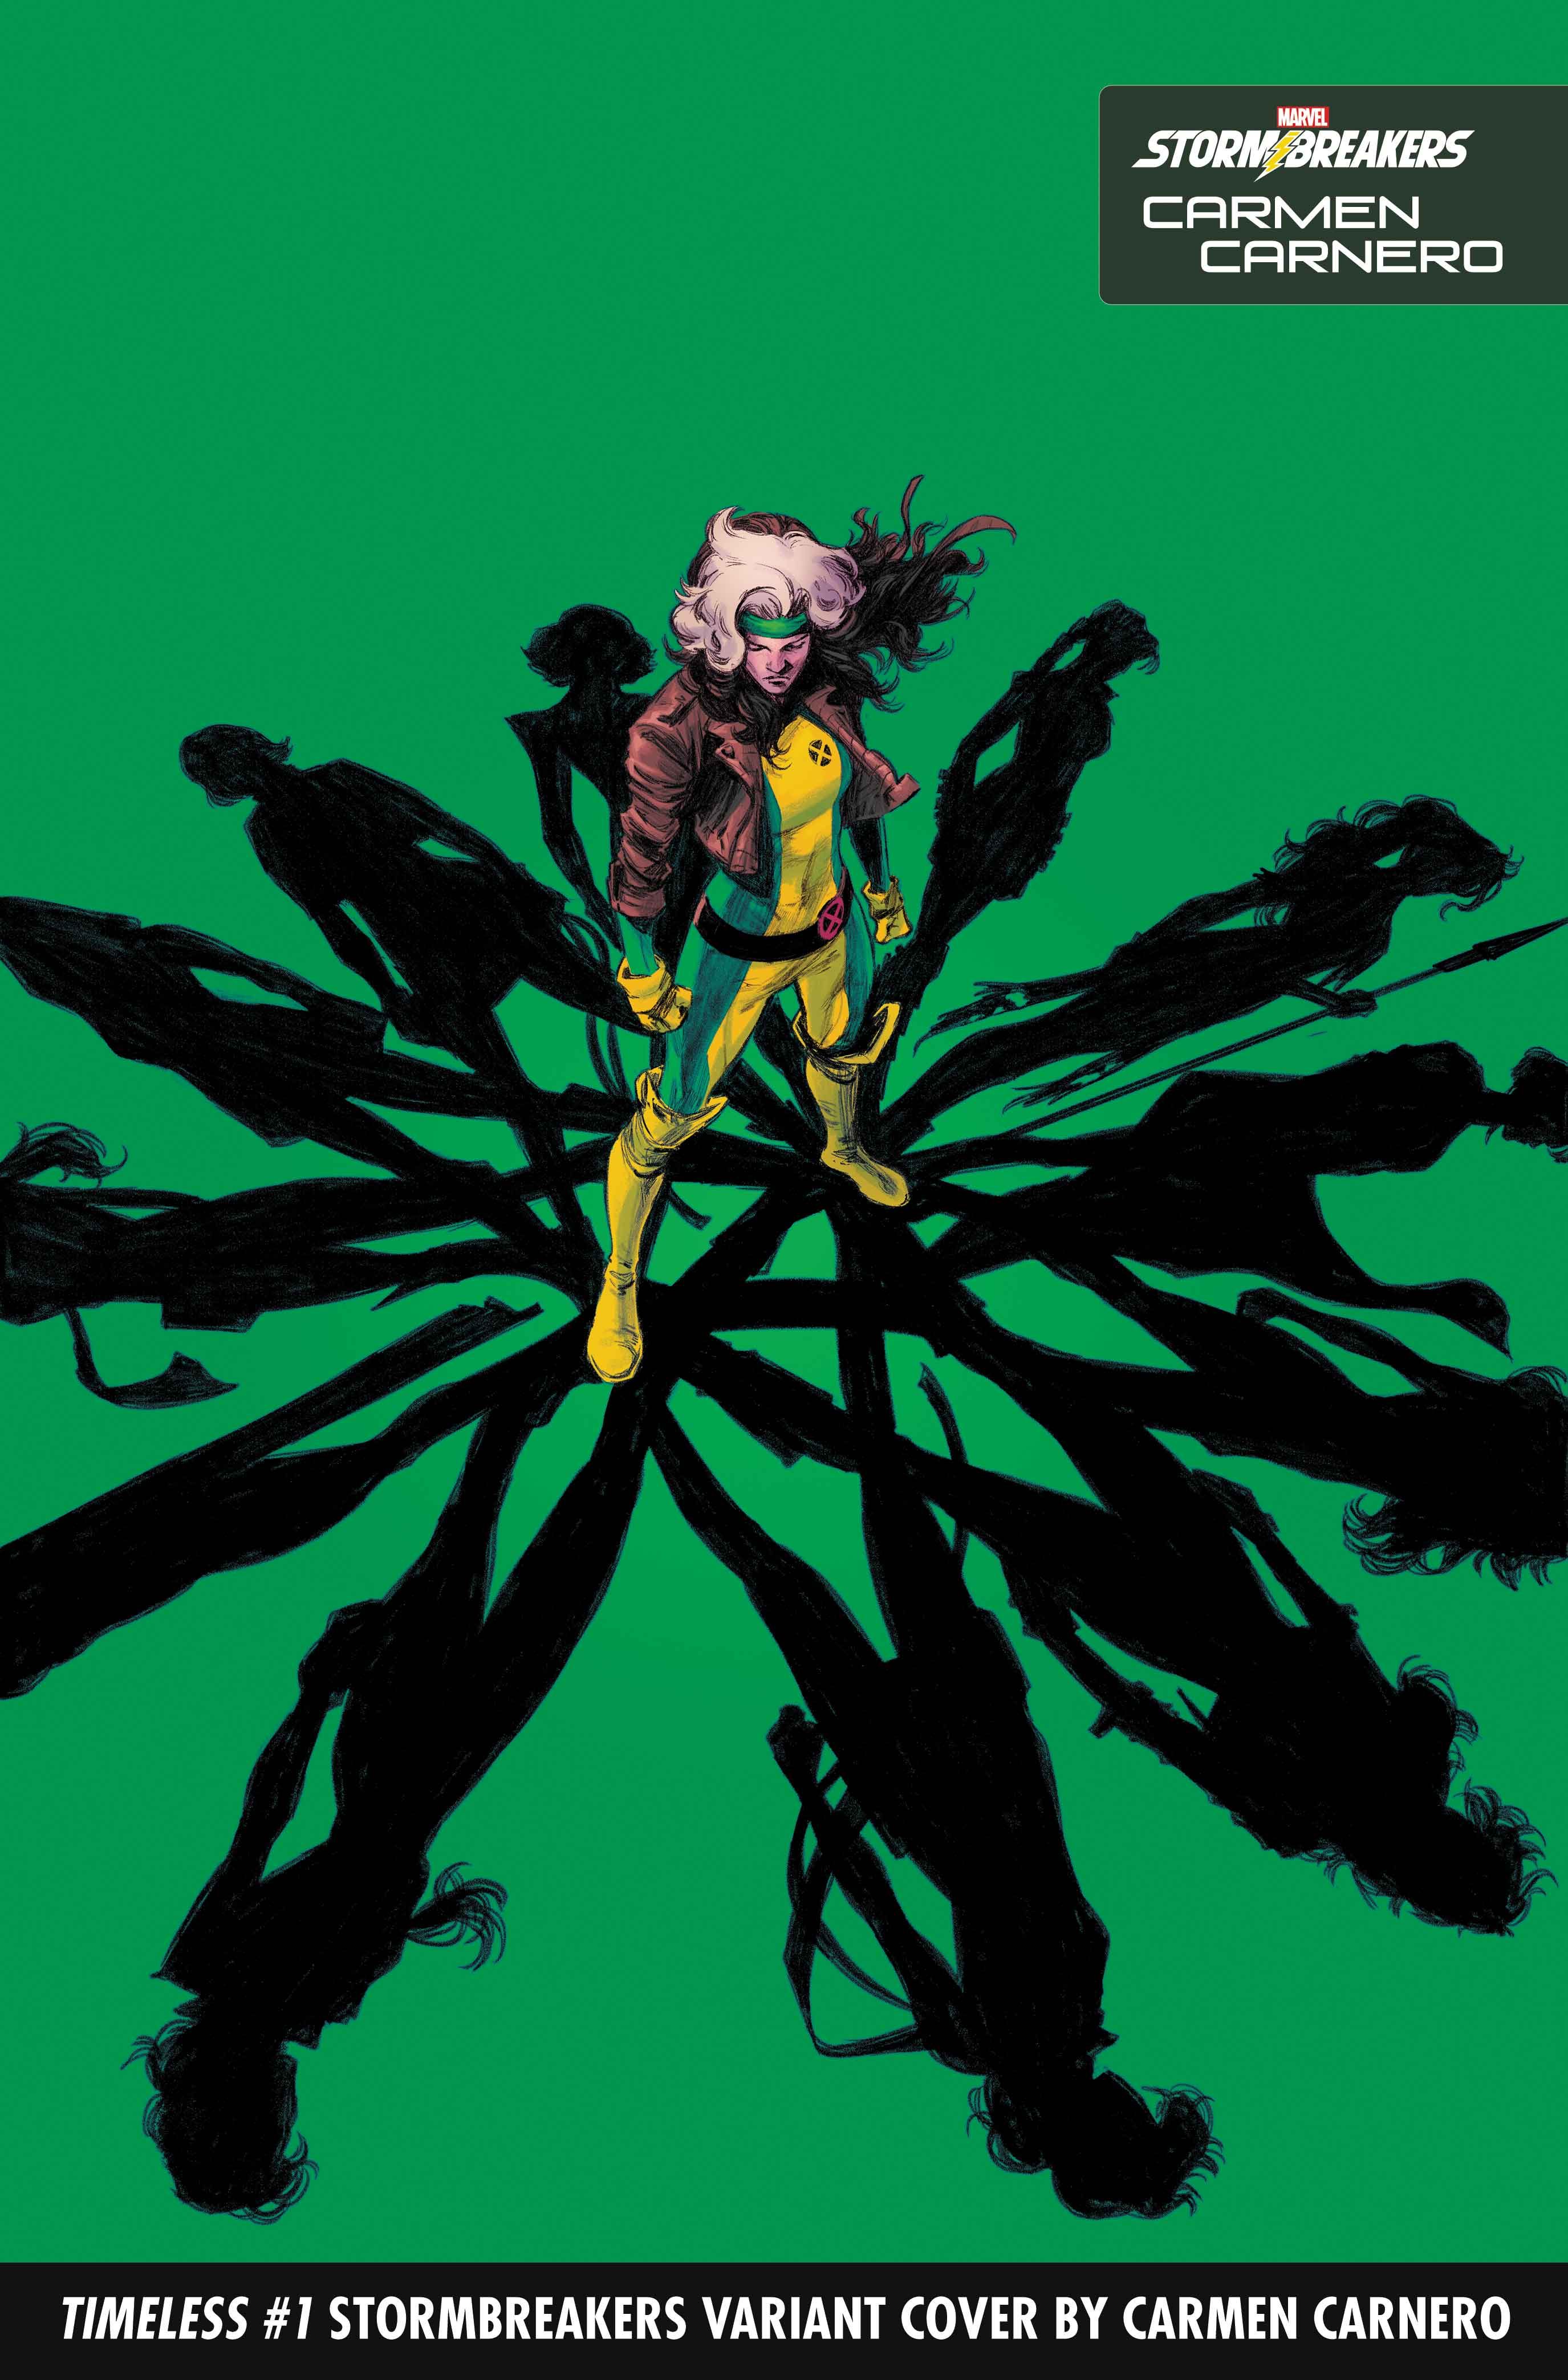 Rogue on the cover of Timeless 1 Stormbreakers variant by Carmen Carnero